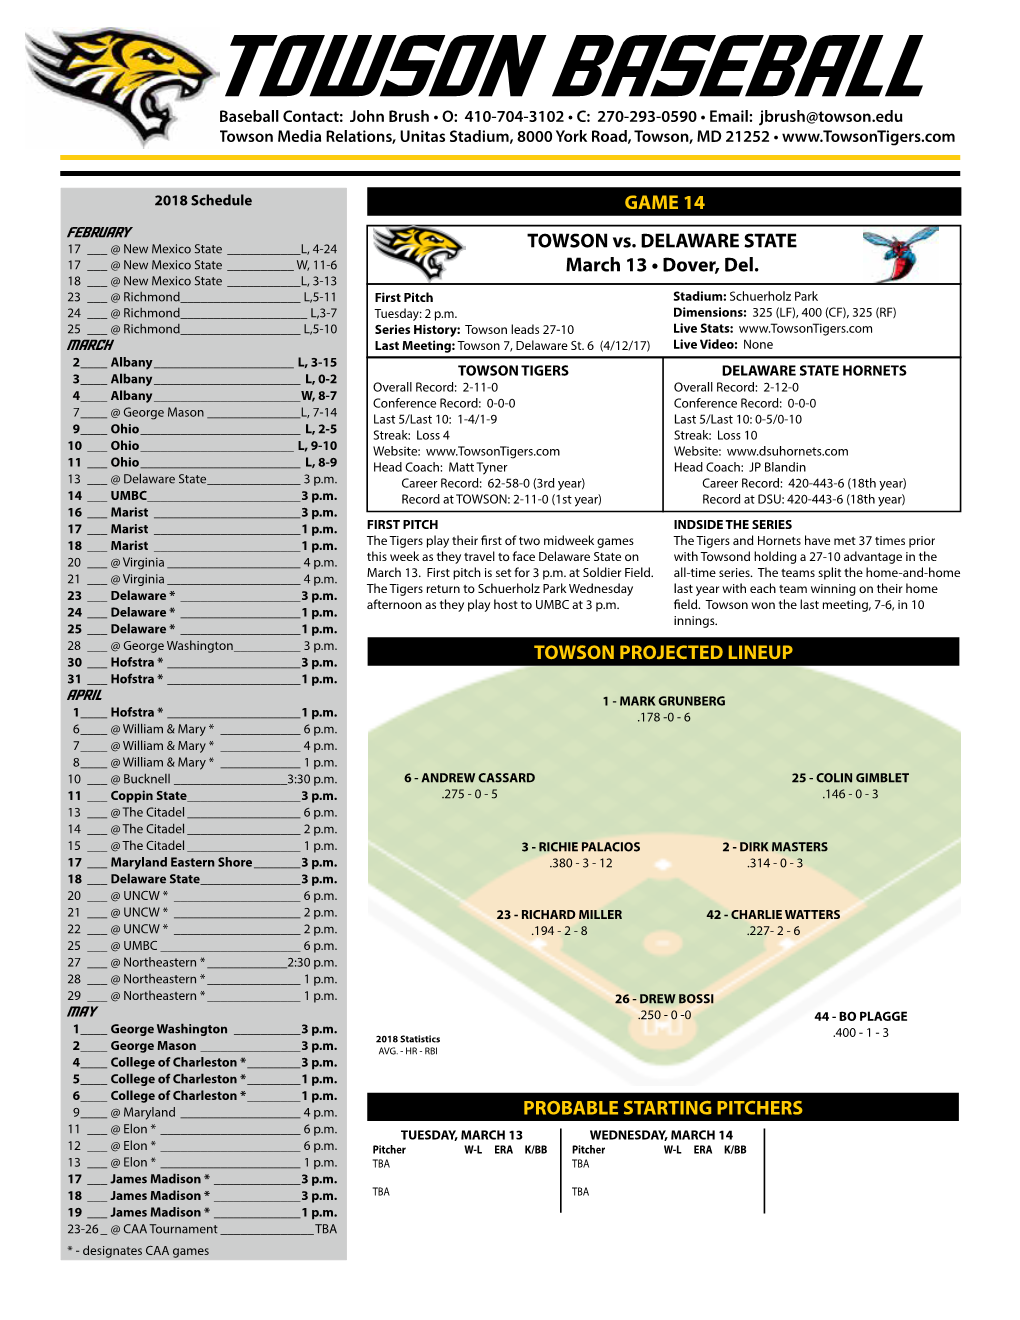 TOWSON BASEBALL GENERAL Midweek Baseball PL AYERS to WATCH Name of School______Towson University the Tigers Play a Pair of Midweek Games This City/Zip______Towson, Md